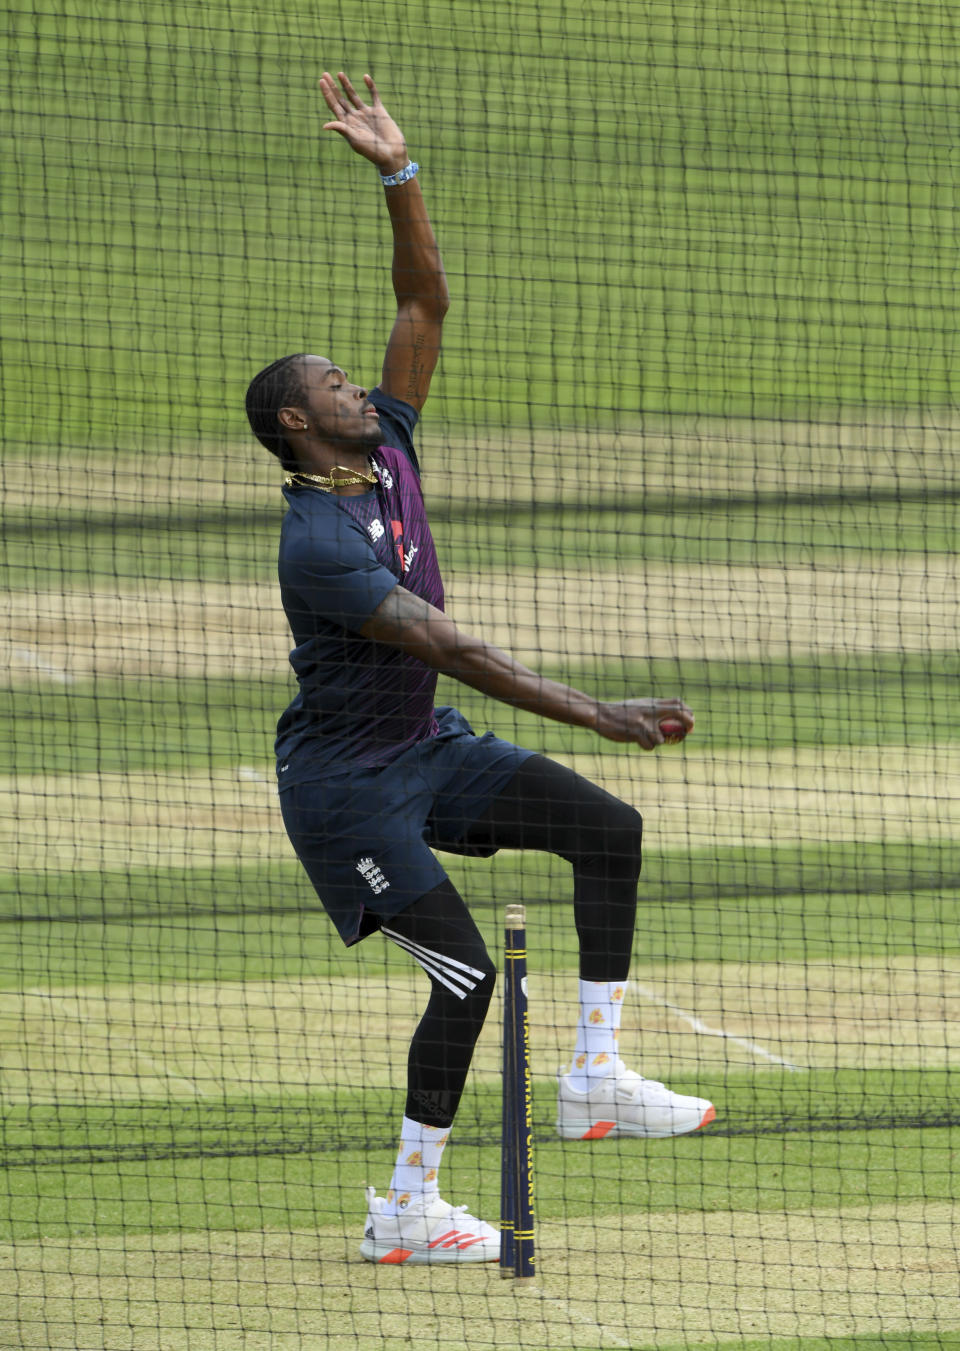 Jofra Archer of England bowls during a nets session at the Ageas Bowl in Southampton, England, Monday July 6, 2020. England are scheduled to play West Indies in their first Test match July 8 - 12. (Stu Forster/Agency Pool via AP)